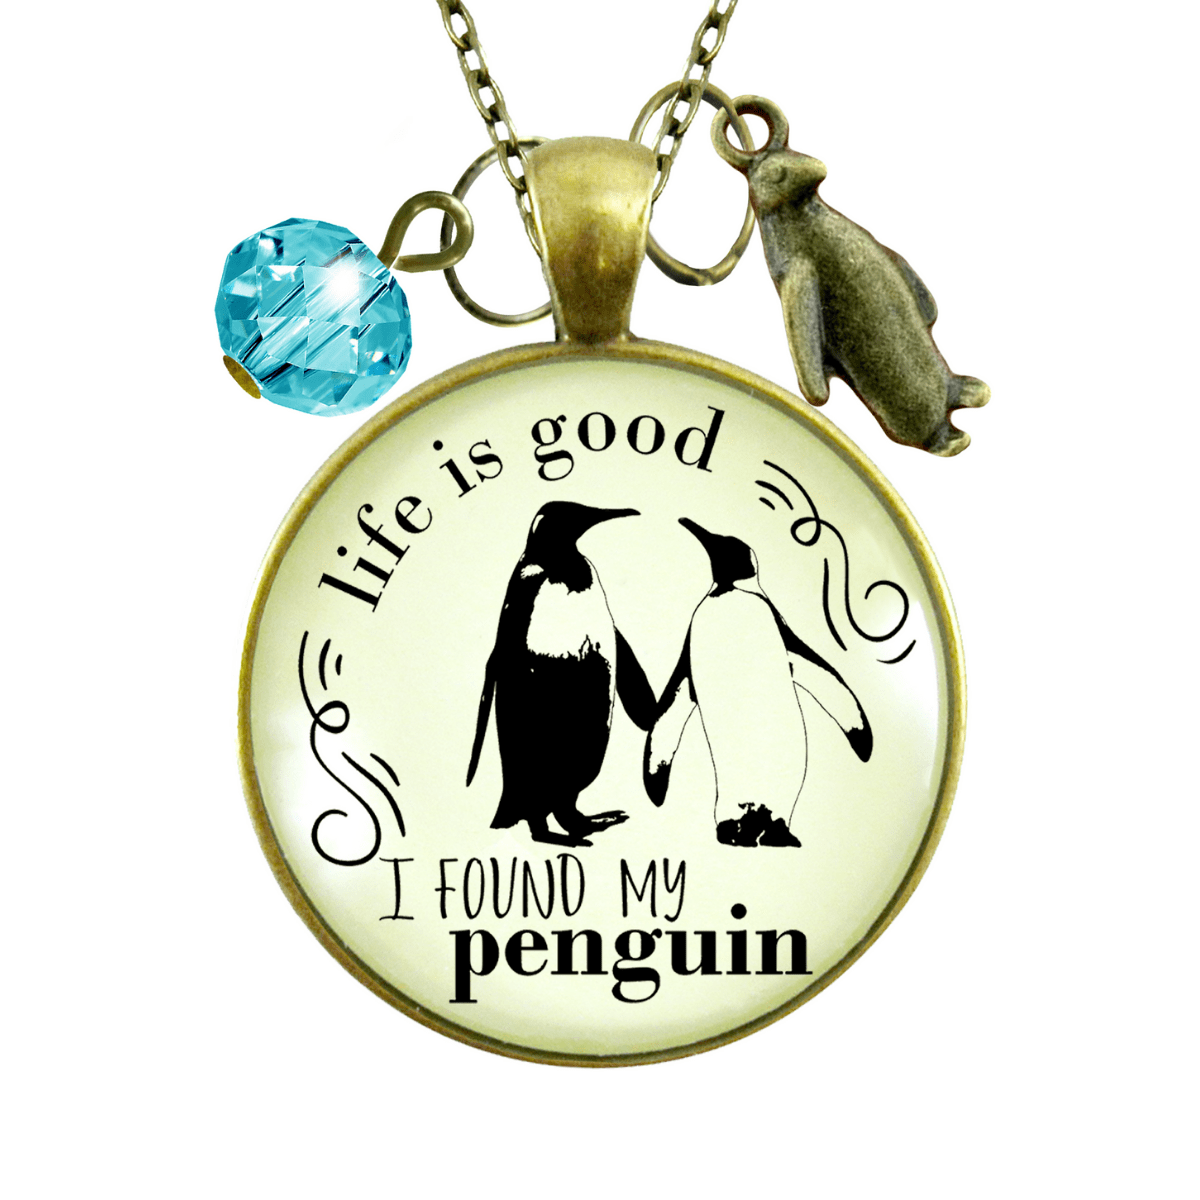 Gutsy Goodness Penguin Necklace Life is Good I Found My Penguin Girlfriend Romantic Gift - Gutsy Goodness;Penguin Necklace Life Is Good I Found My Penguin Girlfriend Romantic Gift - Gutsy Goodness Handmade Jewelry Gifts